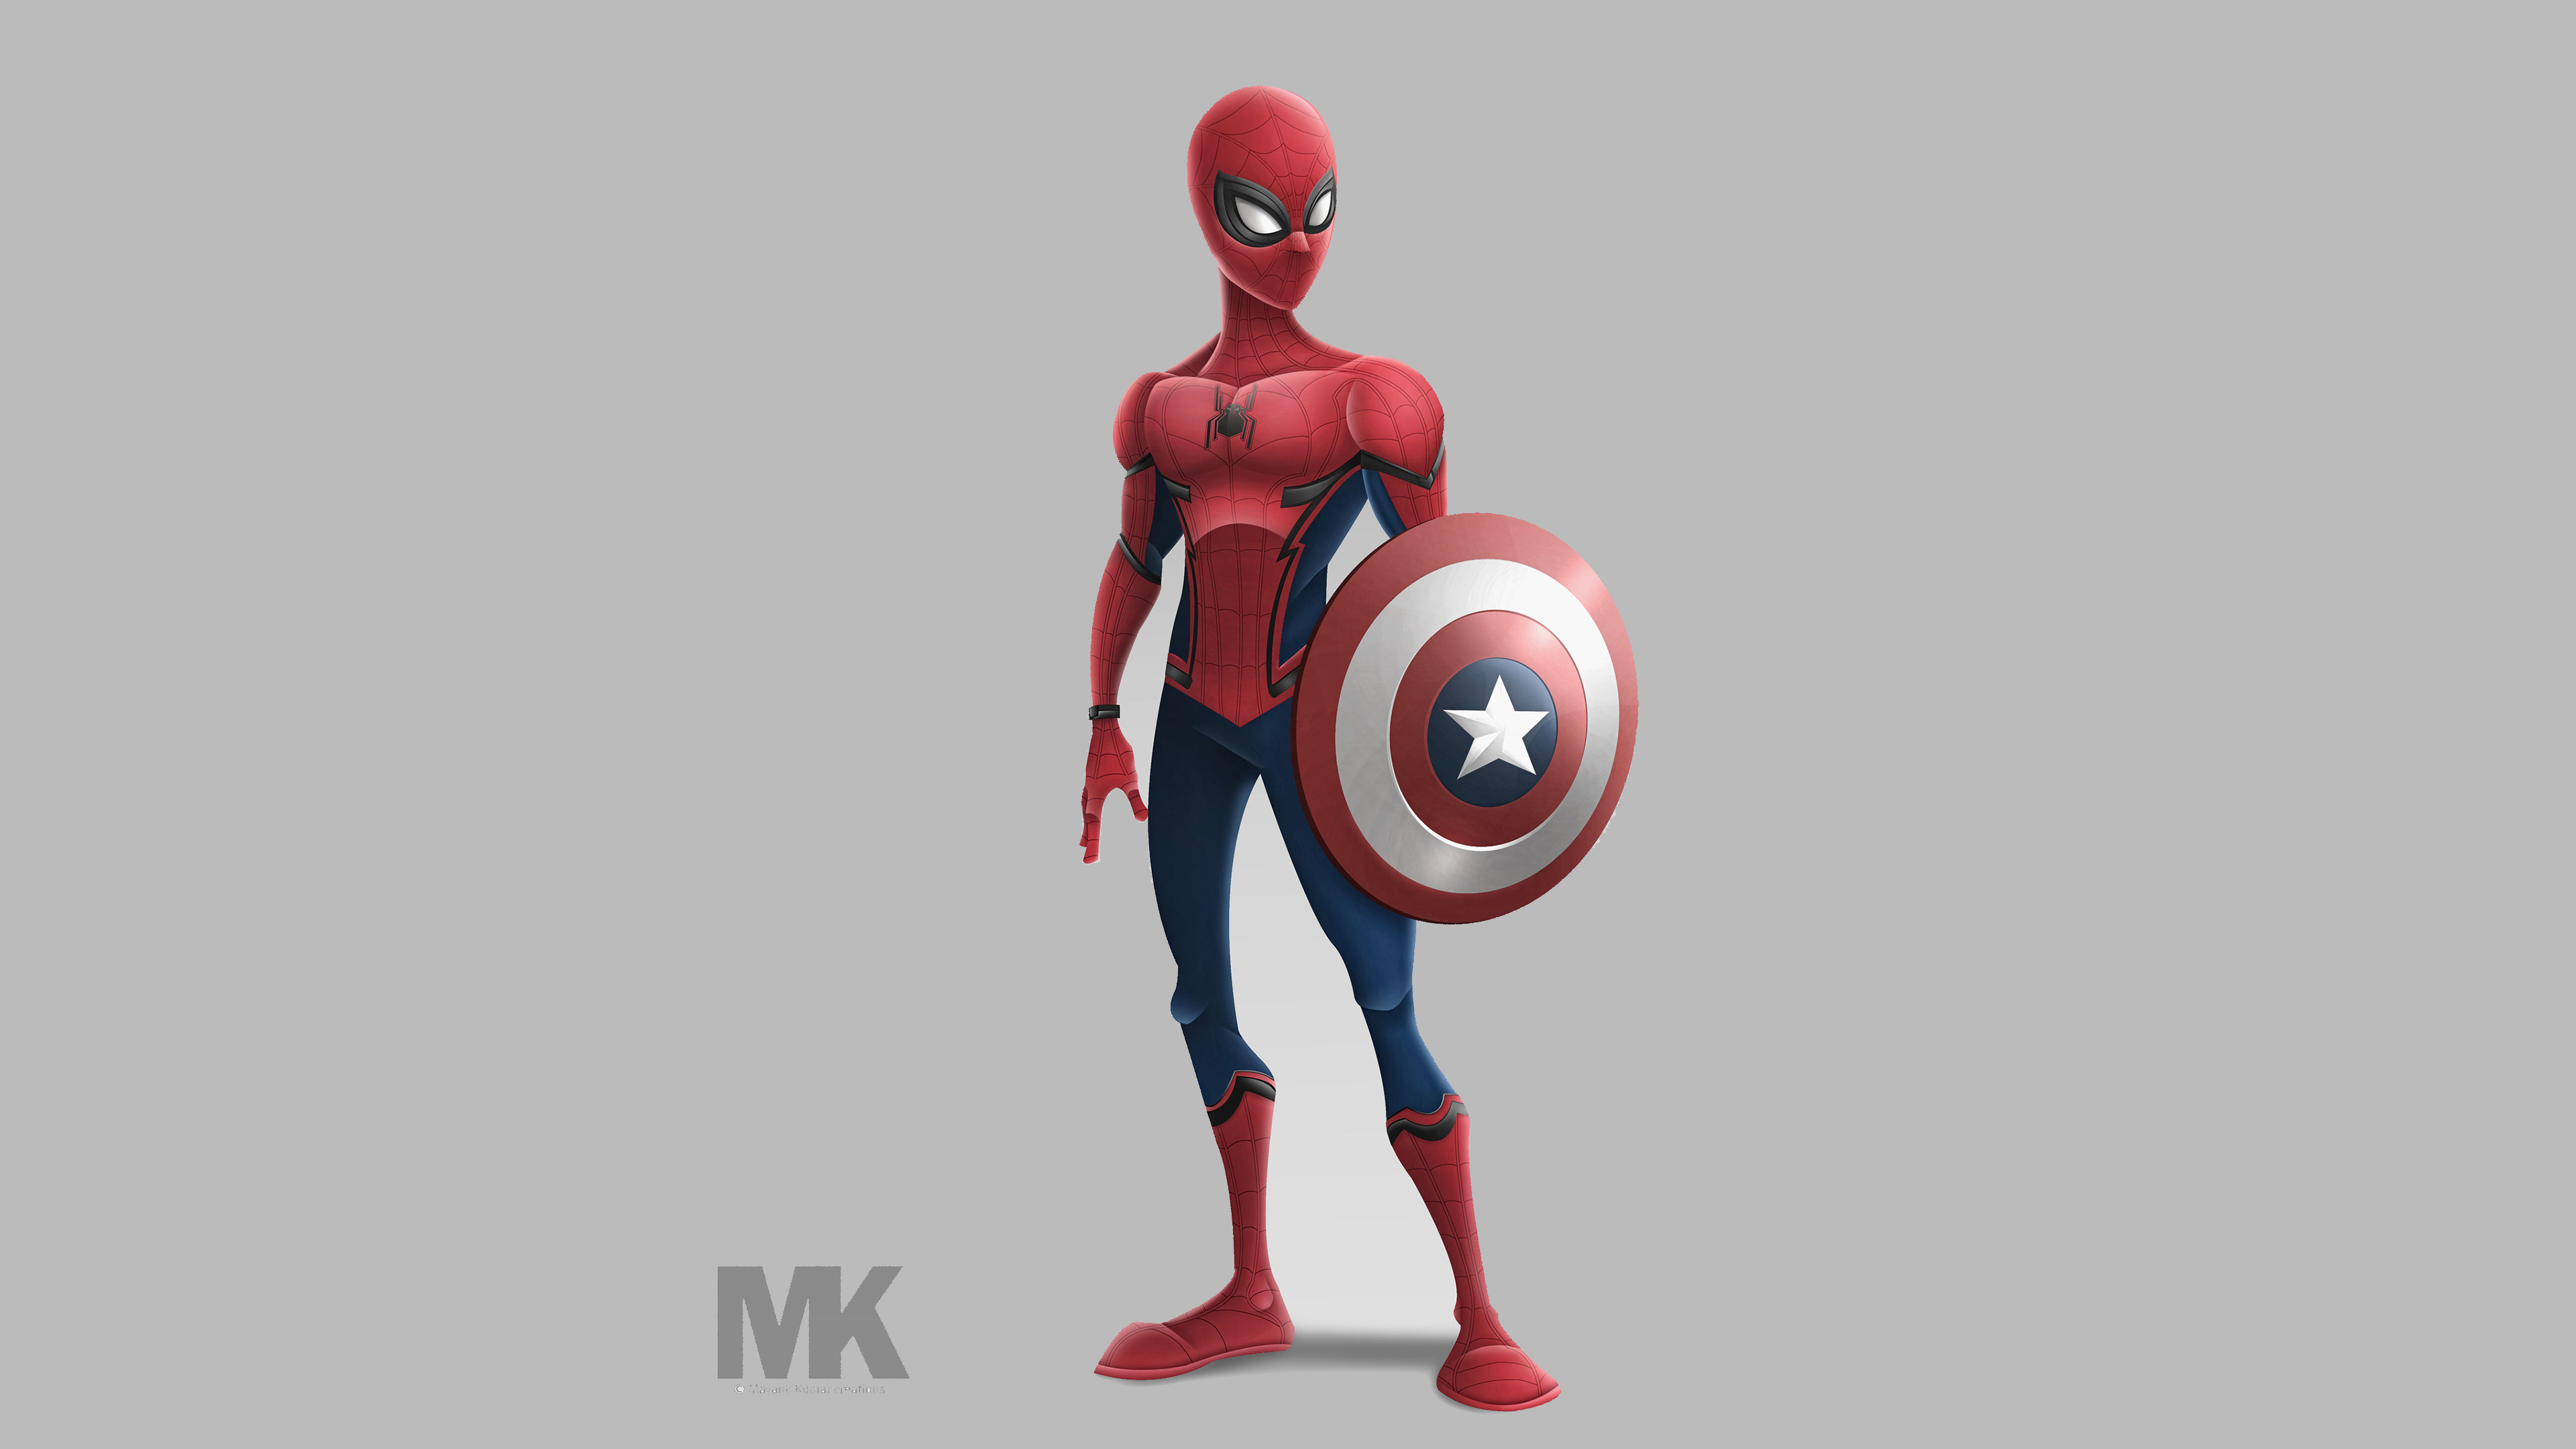 Wallpaper 4k Spiderman With Captain America Shield 4k Wallpapers